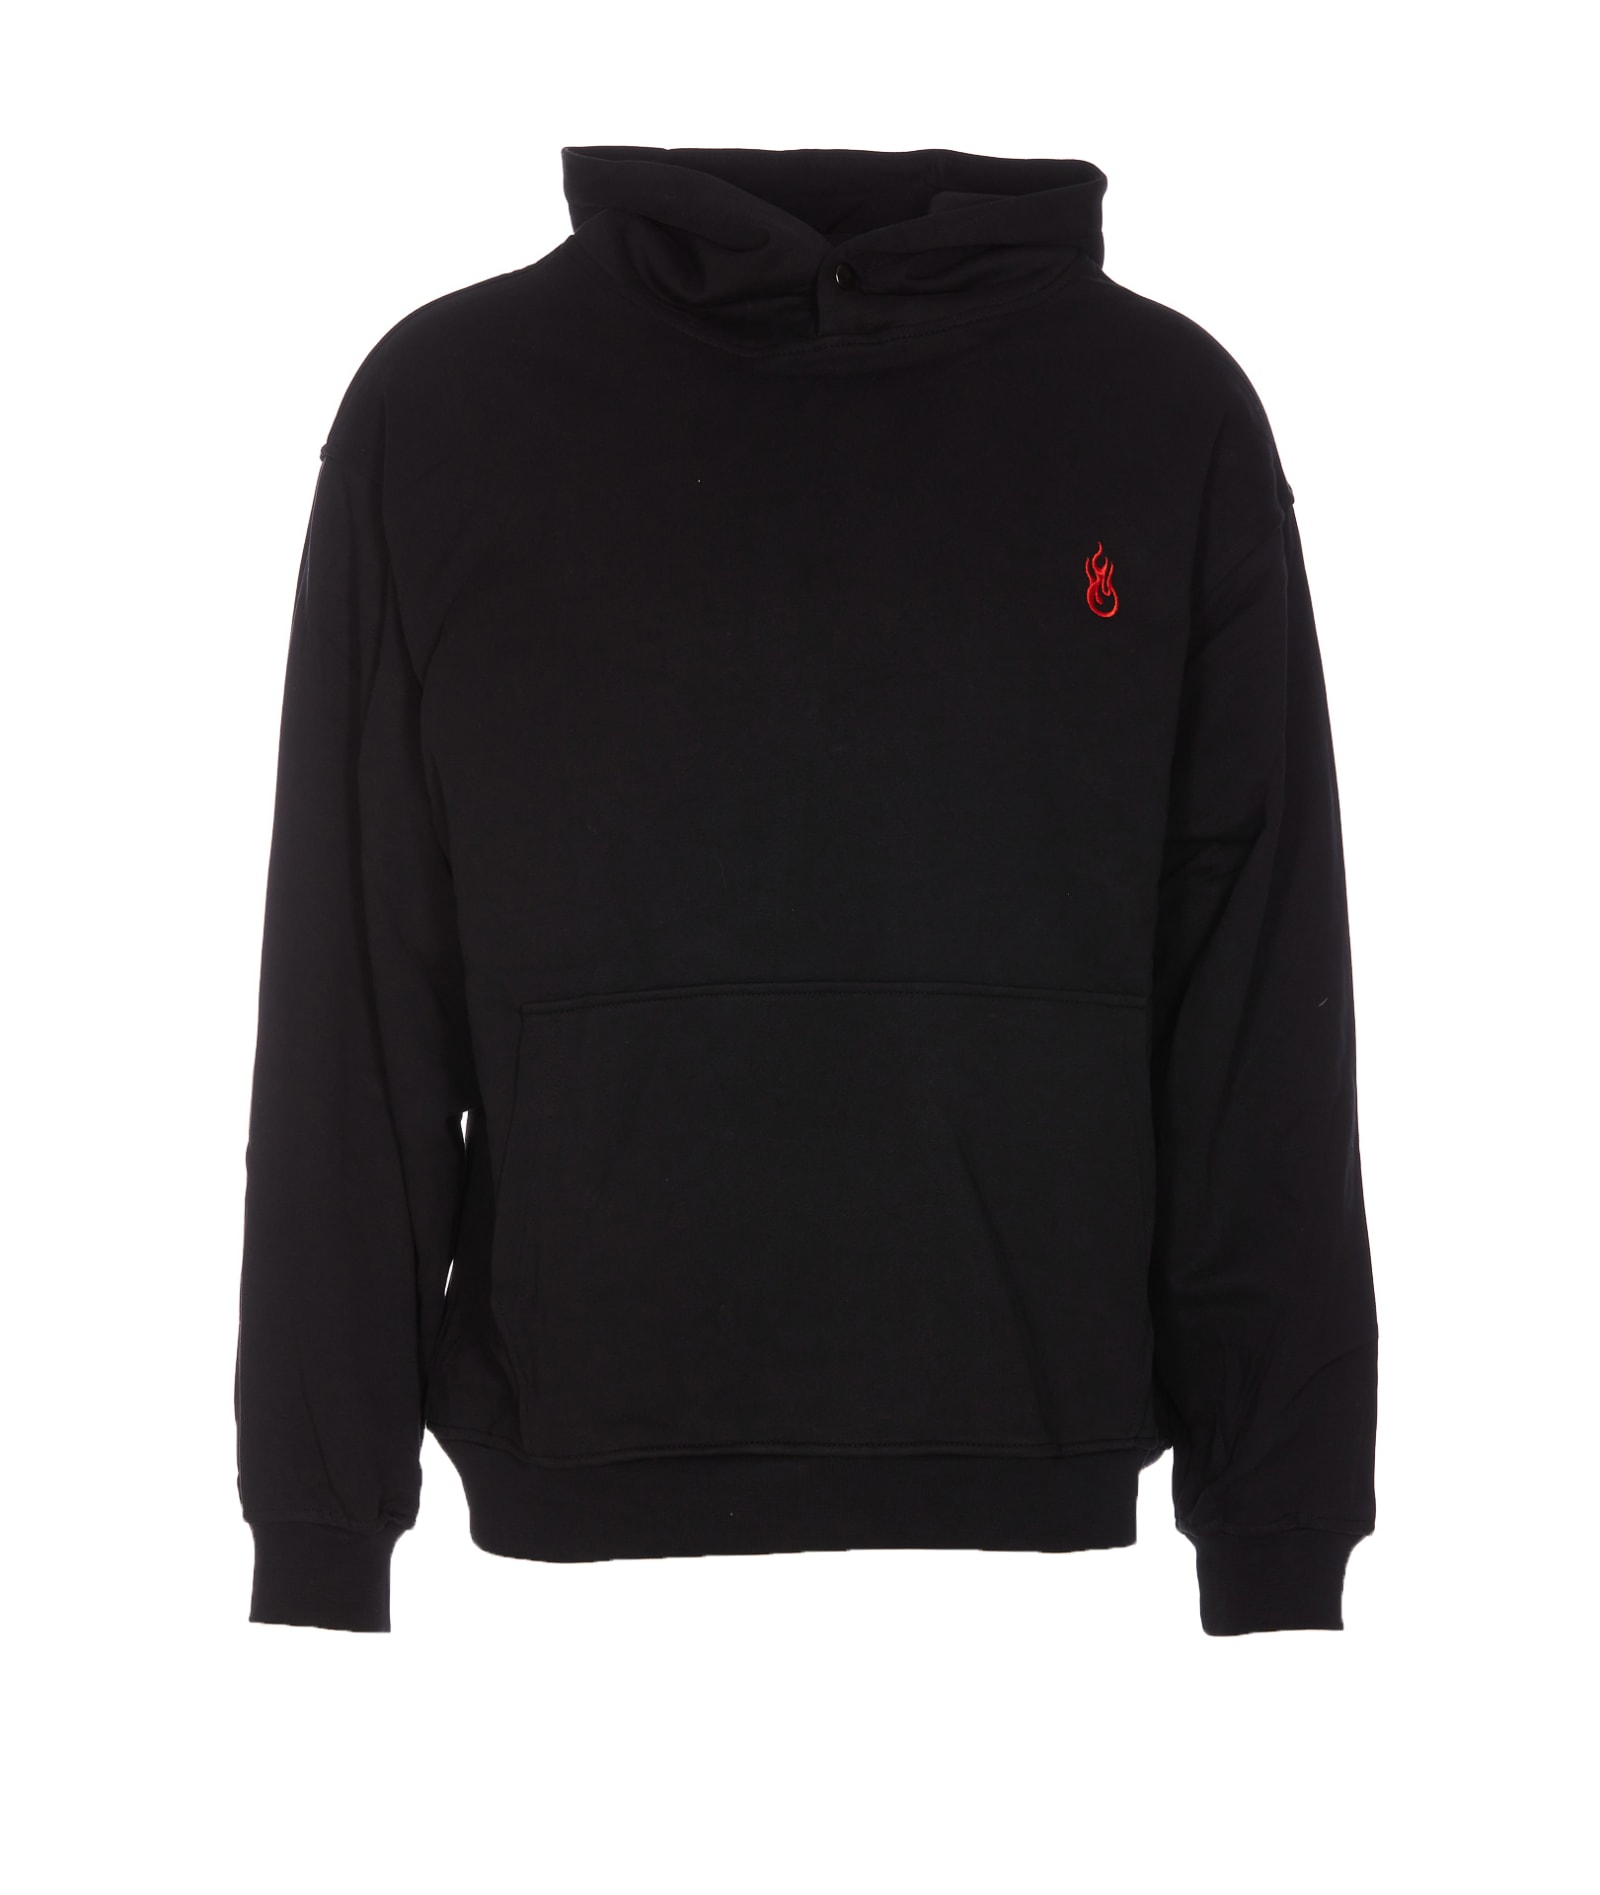 Hoodie With Flames Logo